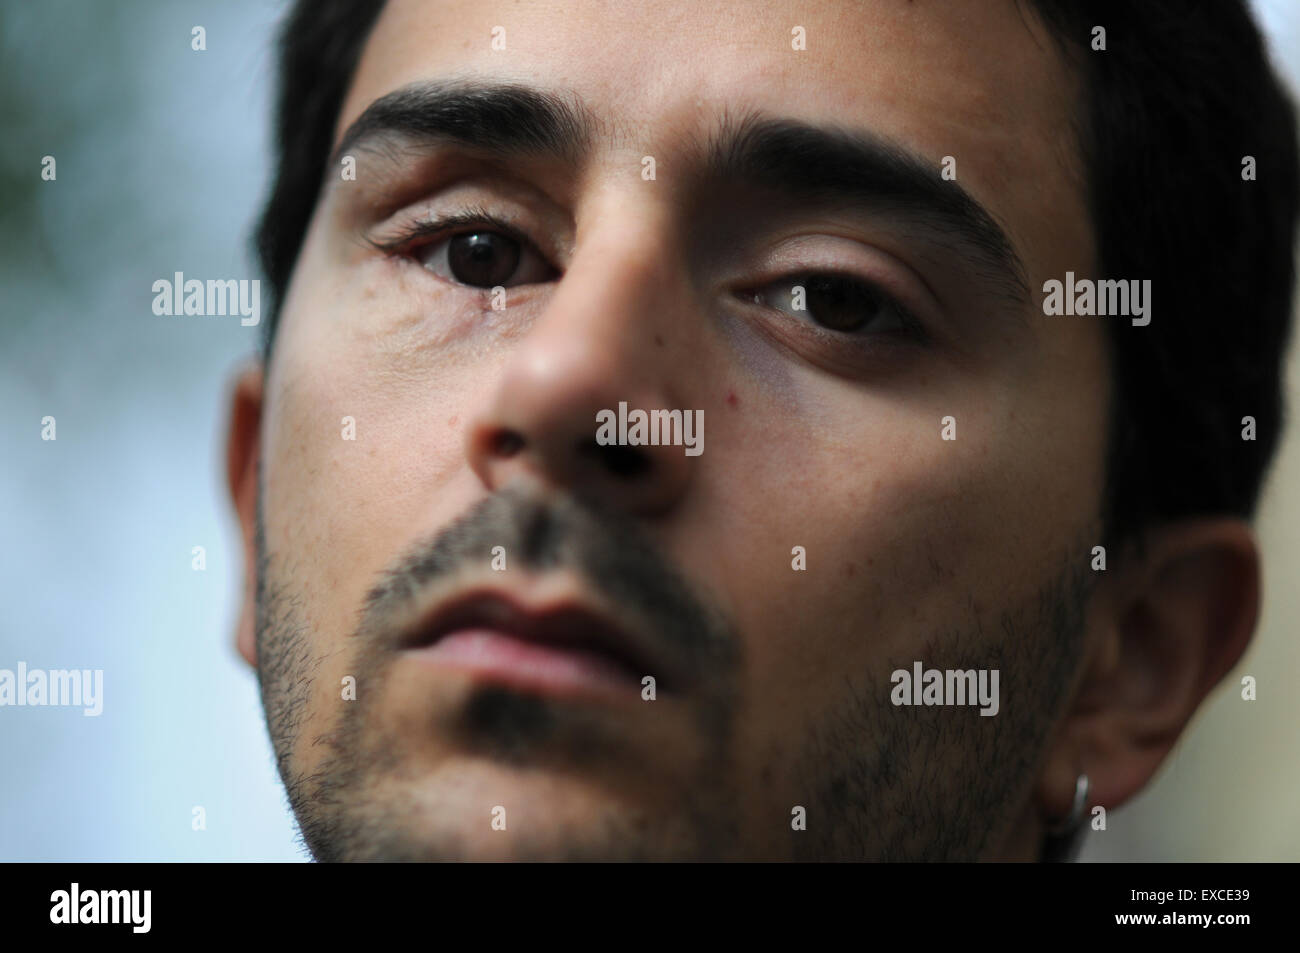 Nicola Tanno, Italian, one of those affected by the use of rubber bullets at the place where he was shot, the Frankfurt Mas located next to Plaza Spain in Barcelona. Spain. He lost an eye. Police violence. Dangerous weapons. Stock Photo